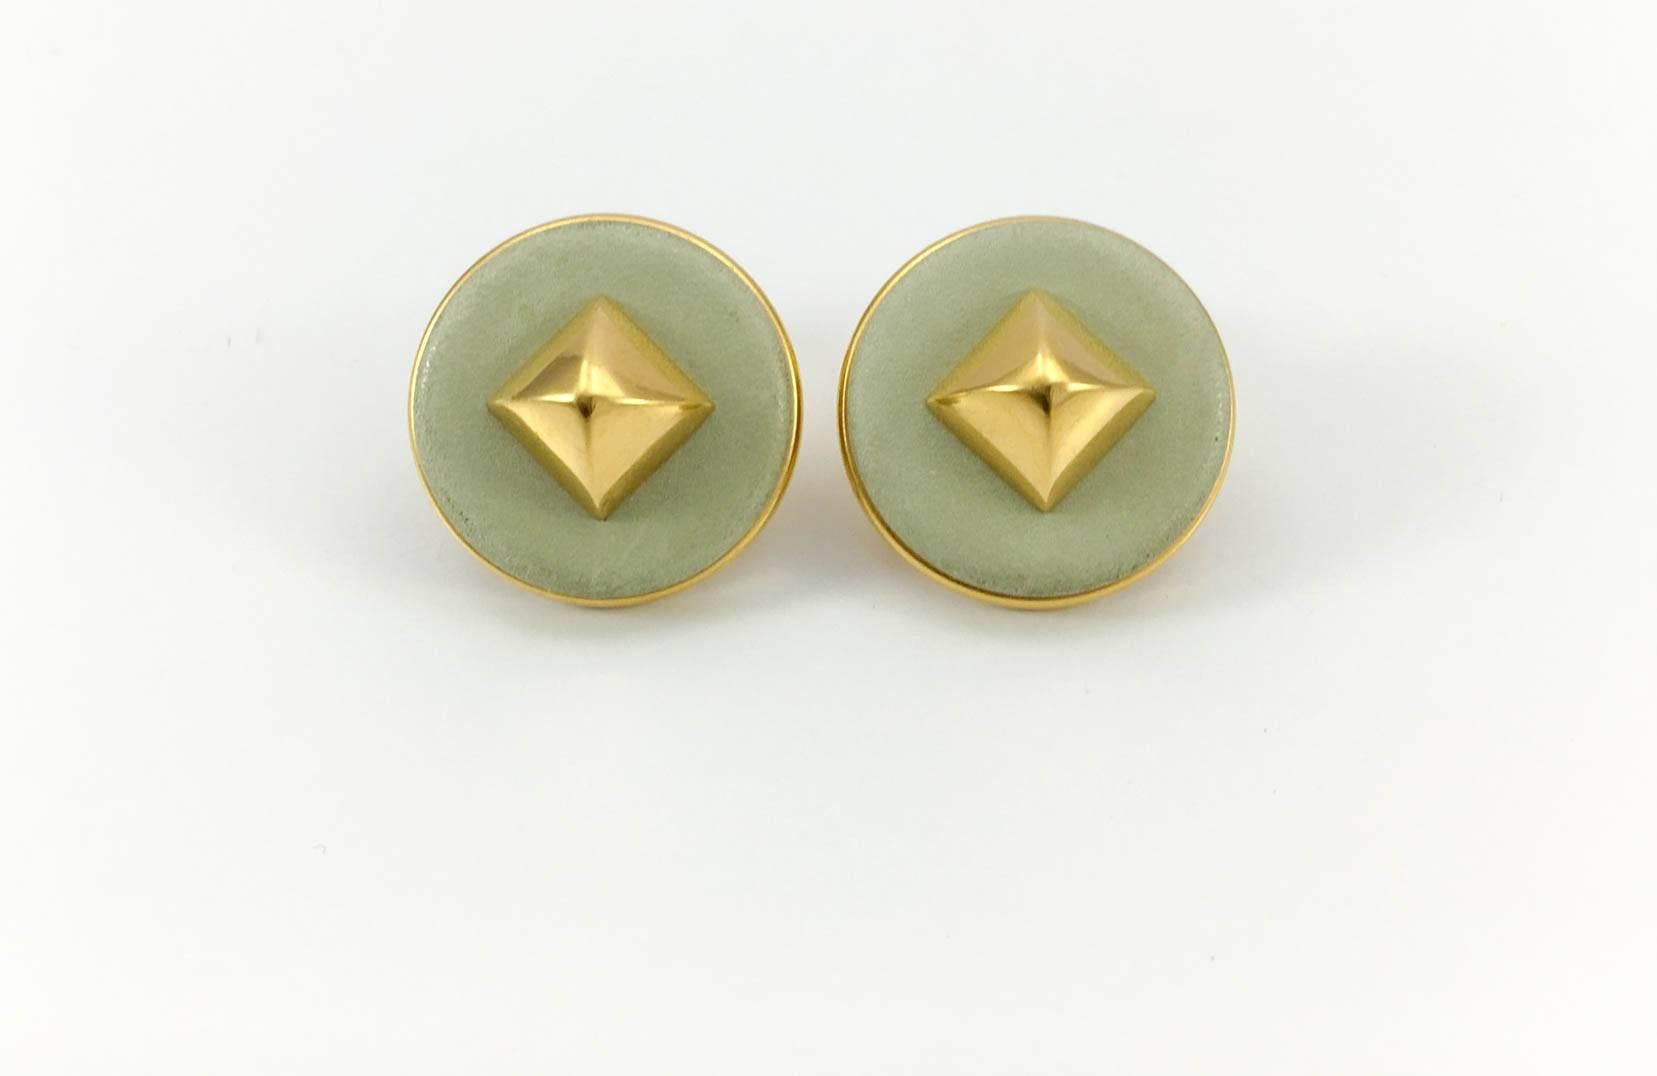 Stylish Hermes Medor Leather and Gilt Metal Earrings. These very elegant earrings by Hermes are made in pale green medor leather. They feature a gilt metal pyramid shaped stud in the centre. Hermes signed on the back. A perfect example of the